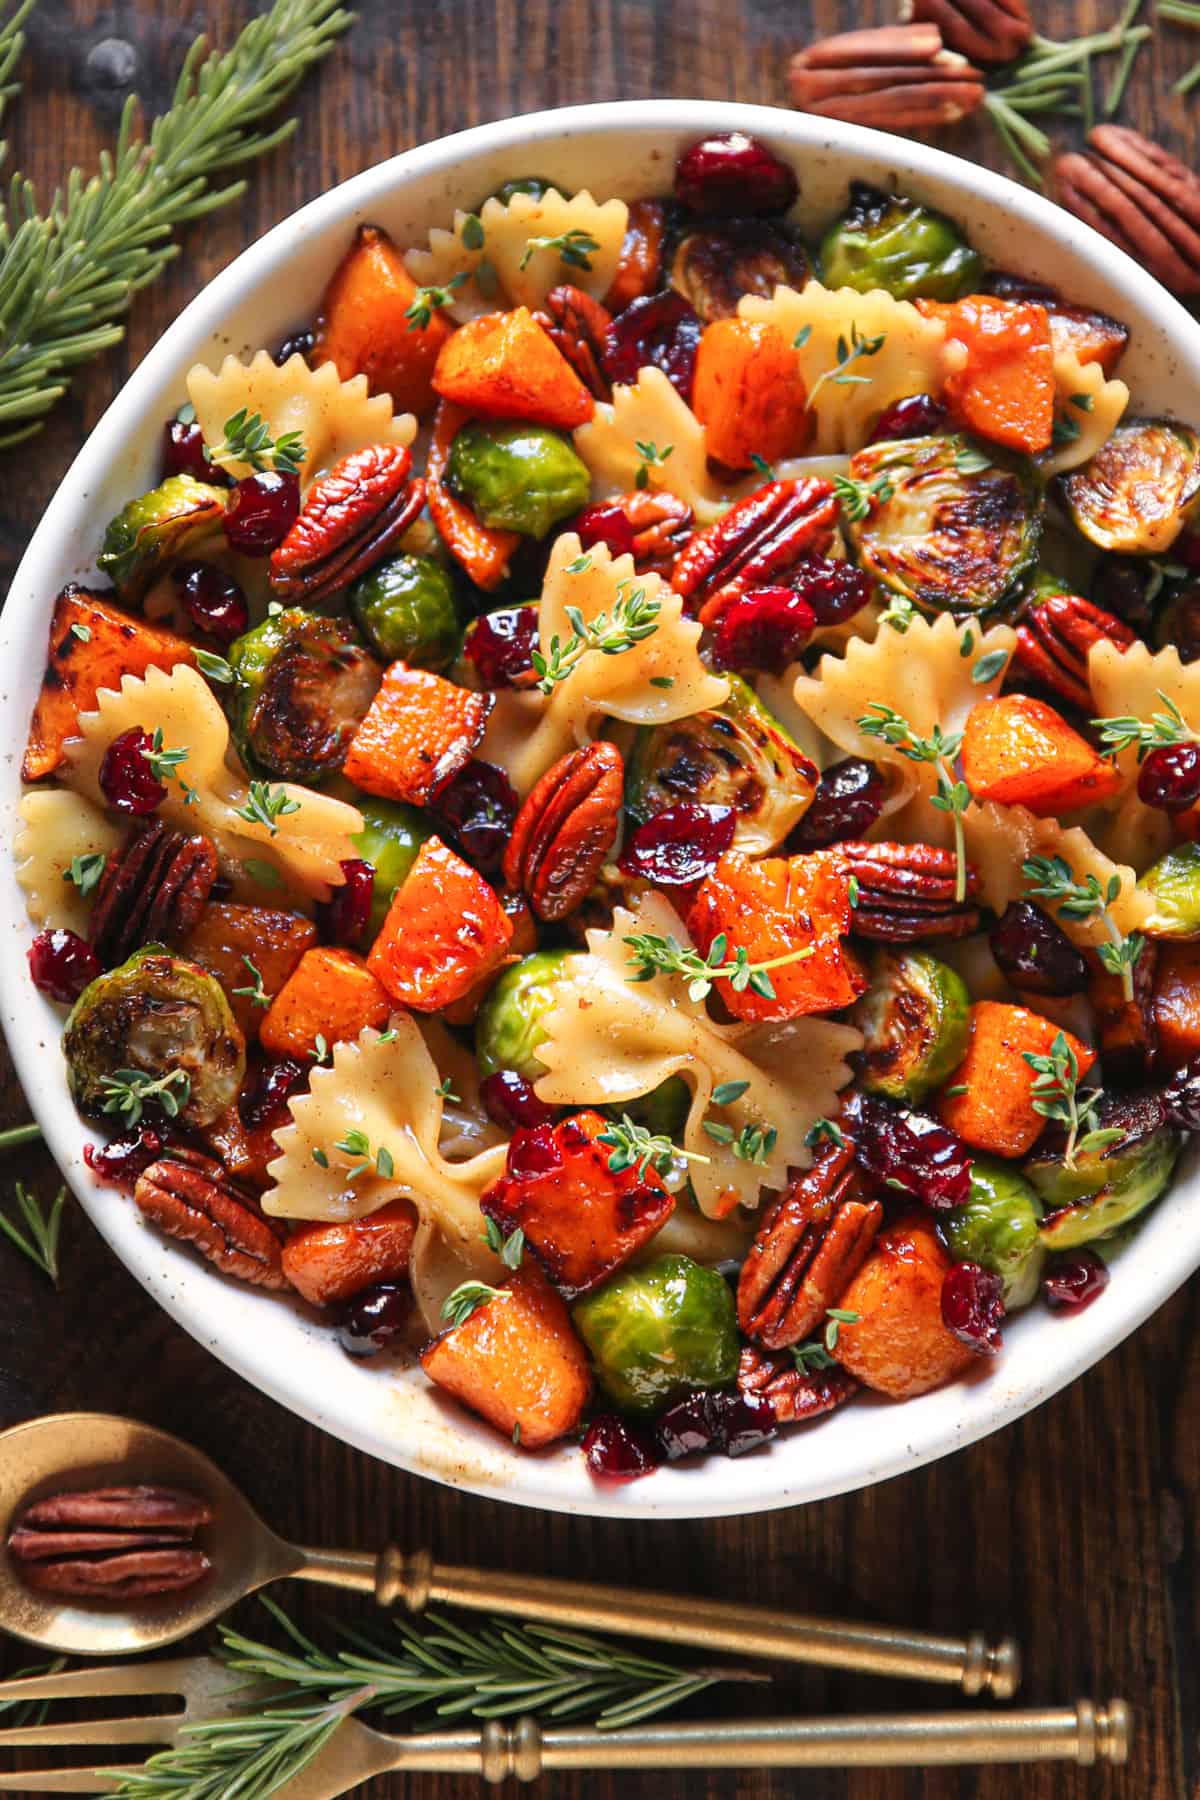 Butternut Squash Pasta Salad with Brussels Sprouts, Pecans, and Cranberries